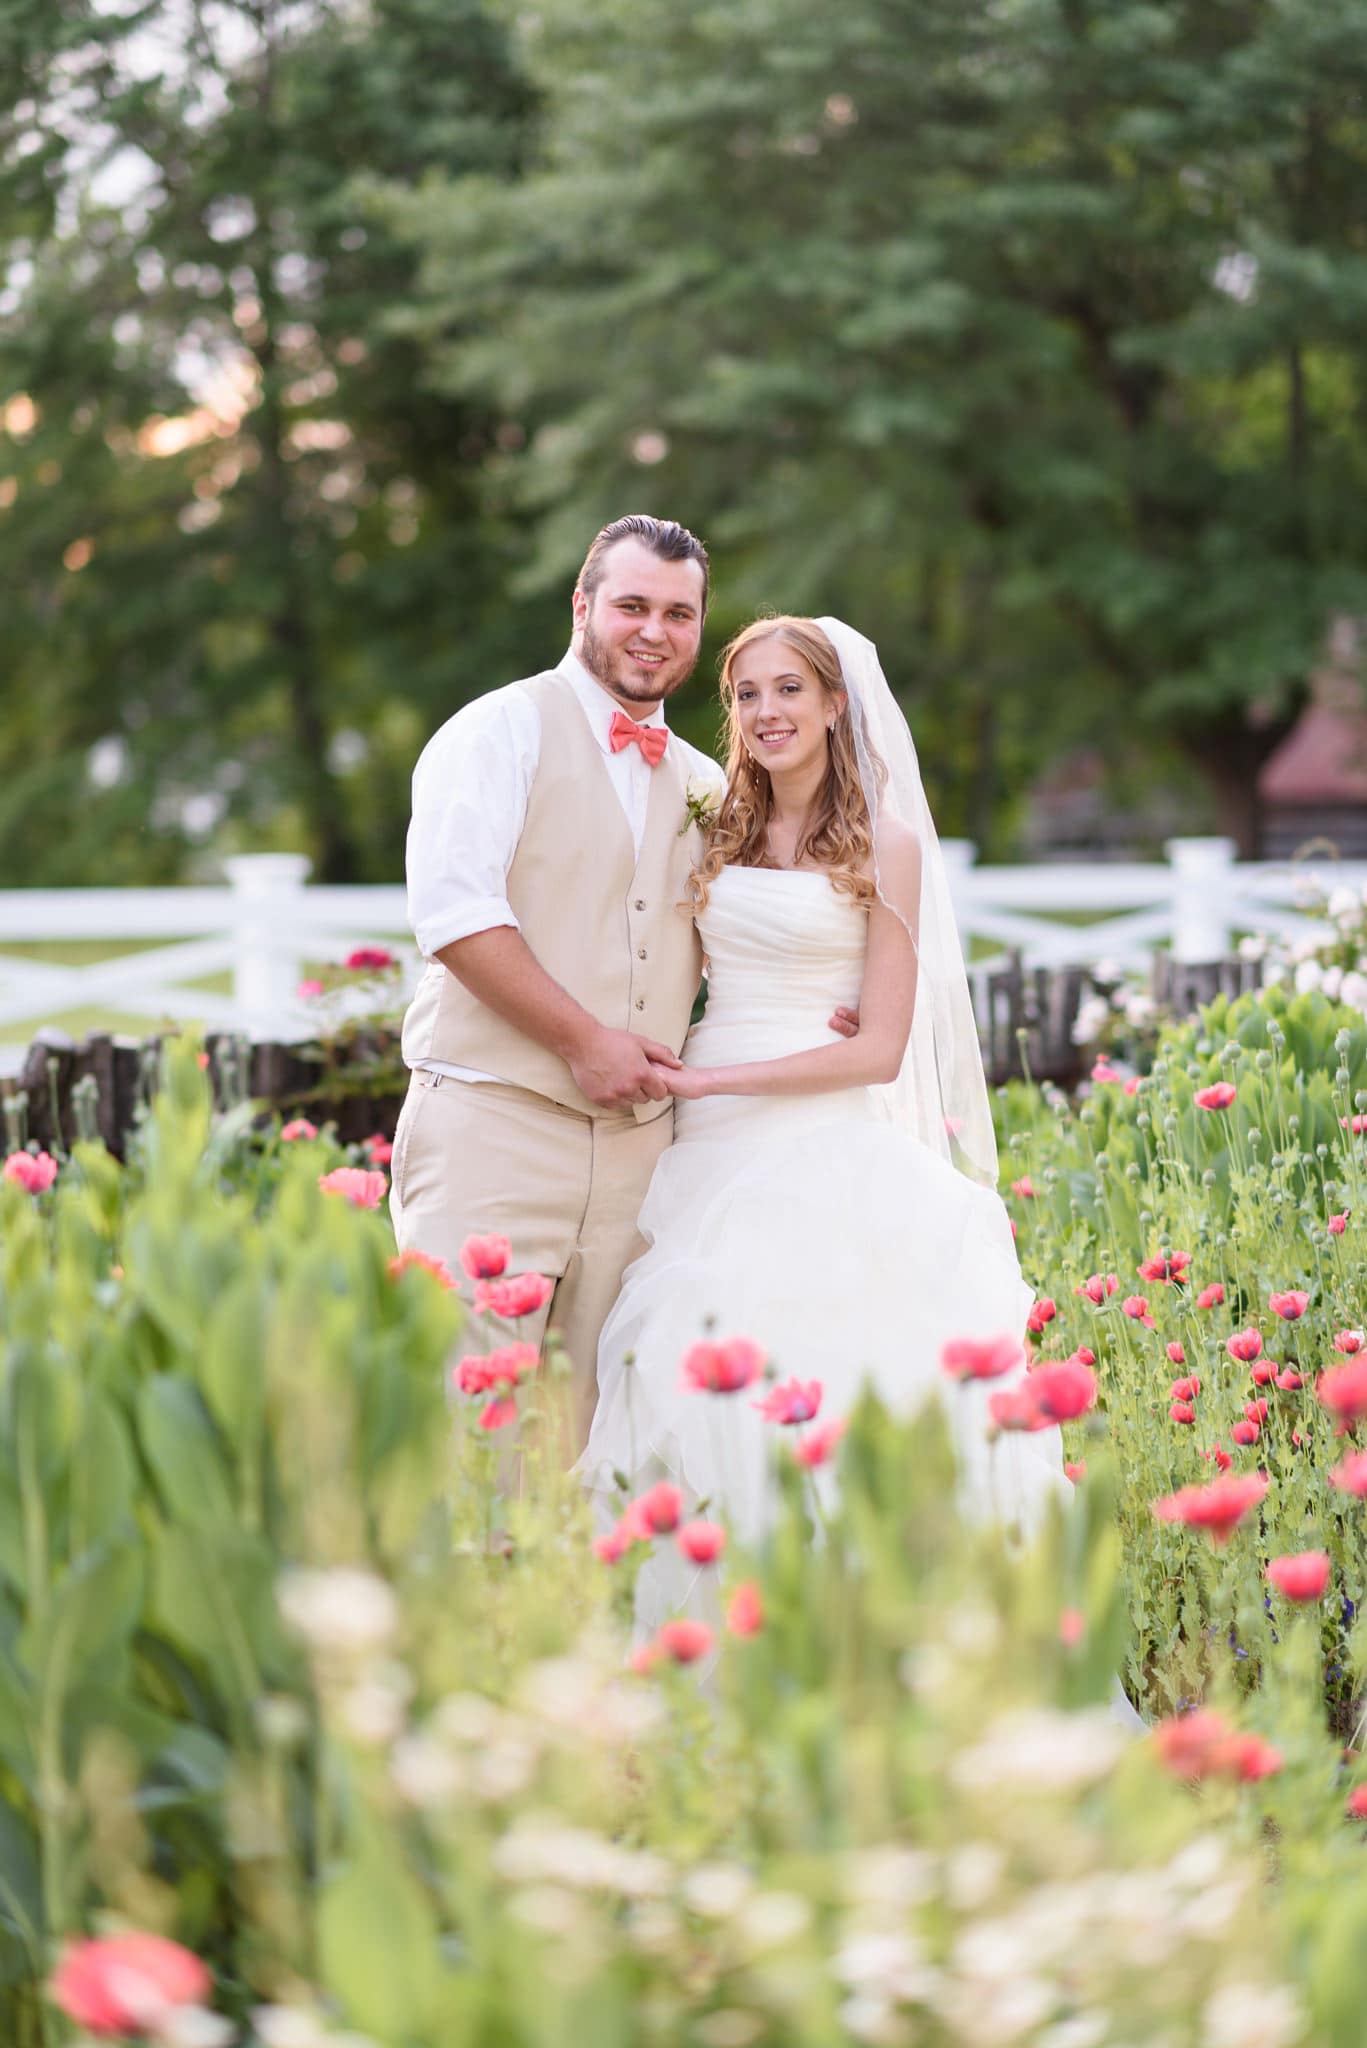 Couple smiling at camera surrounded by flowers - Wildberry Farm